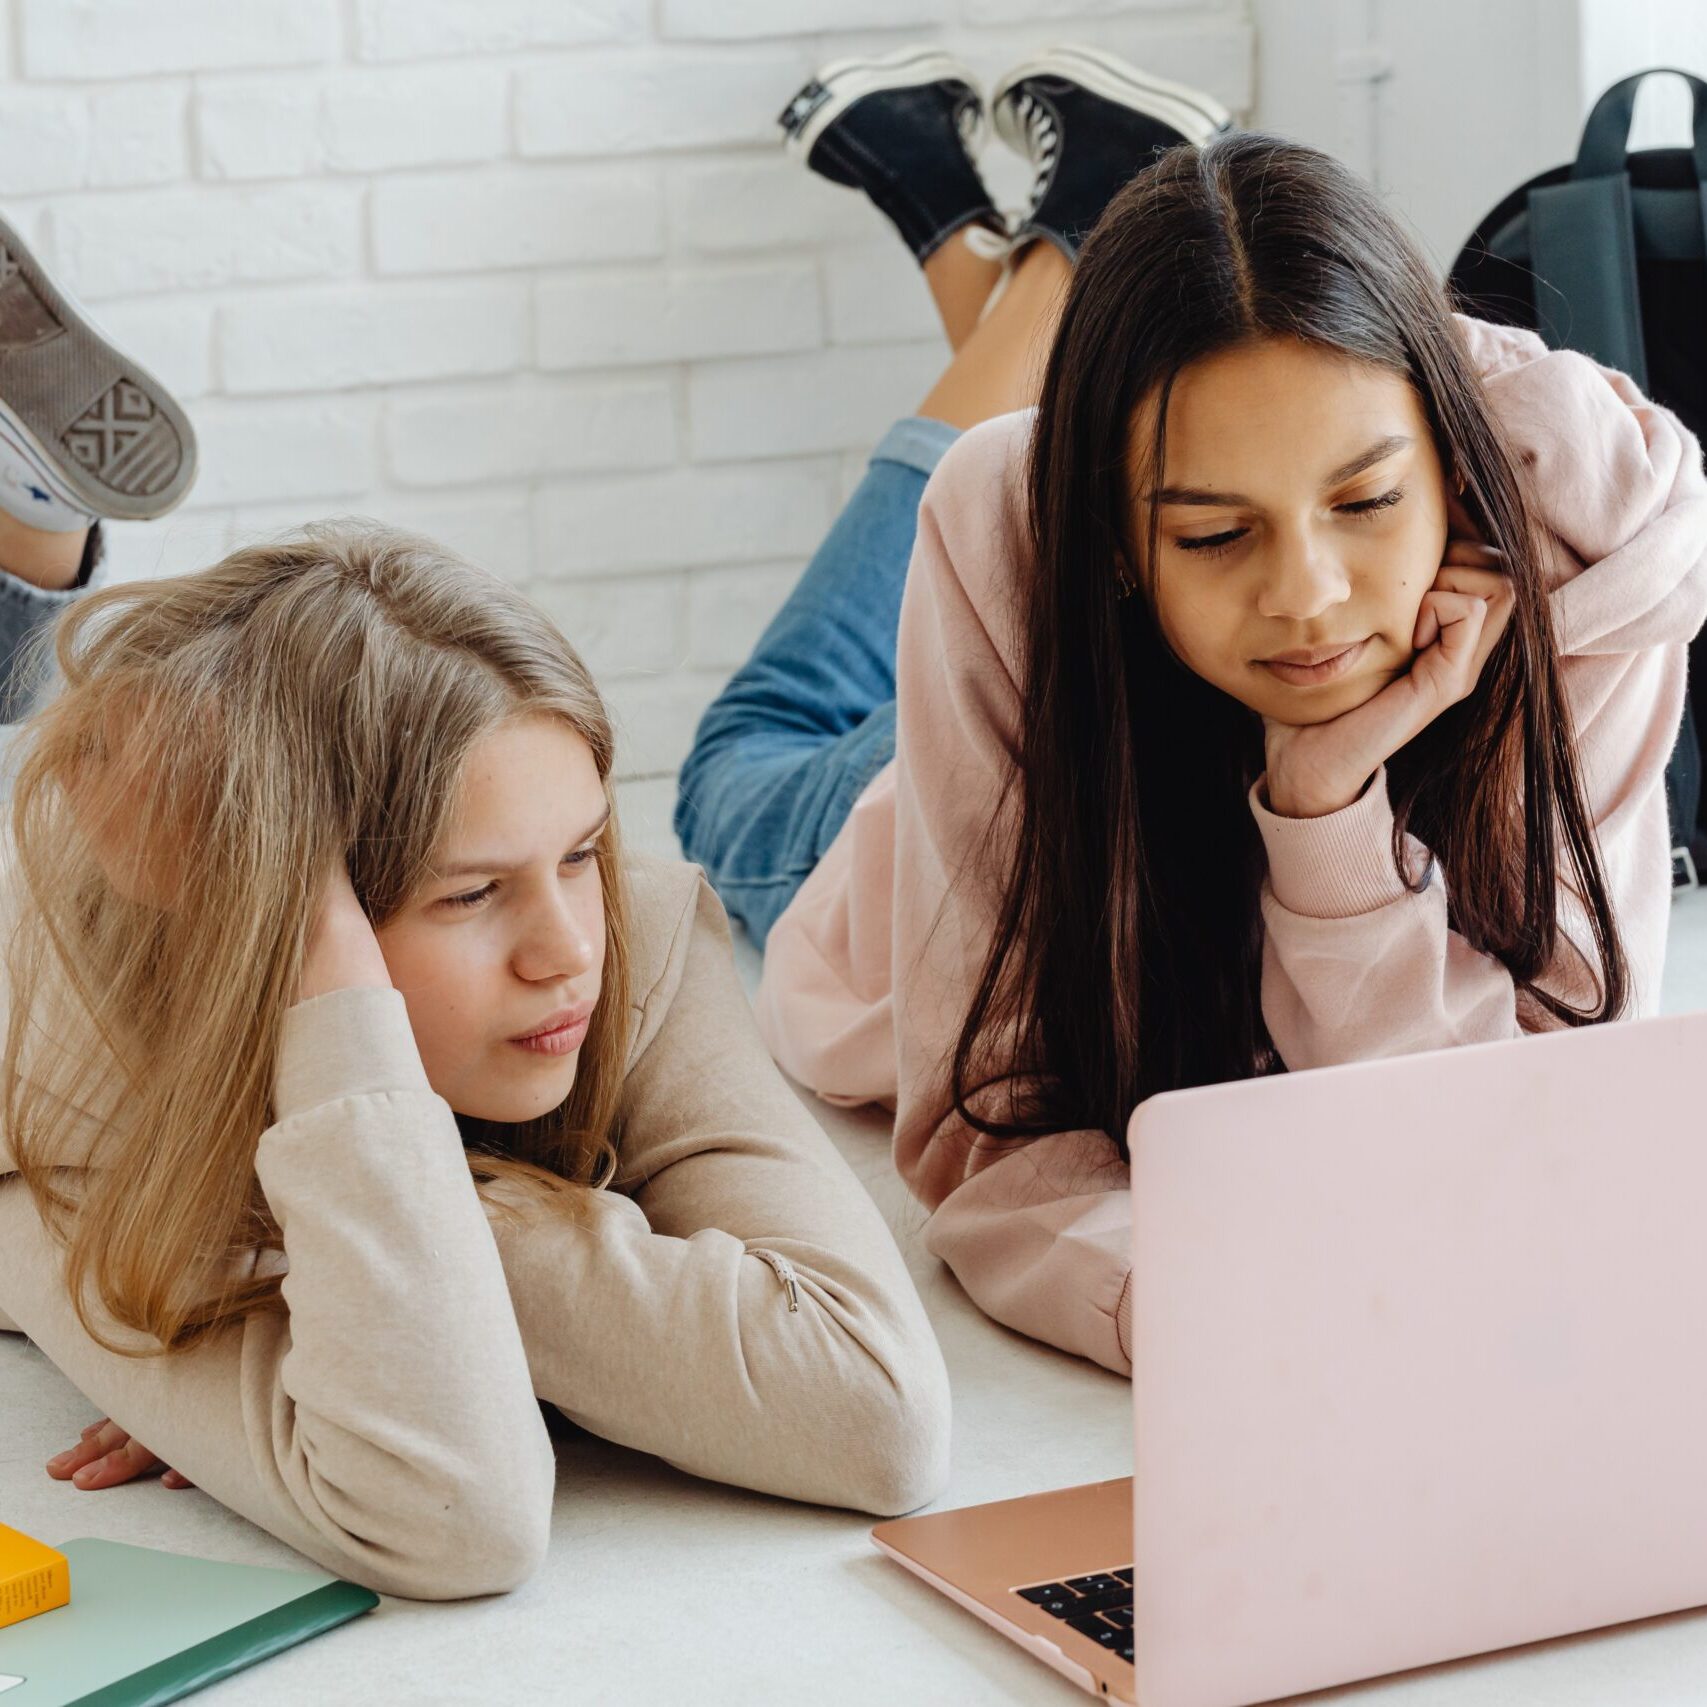 Two girls looking at computer